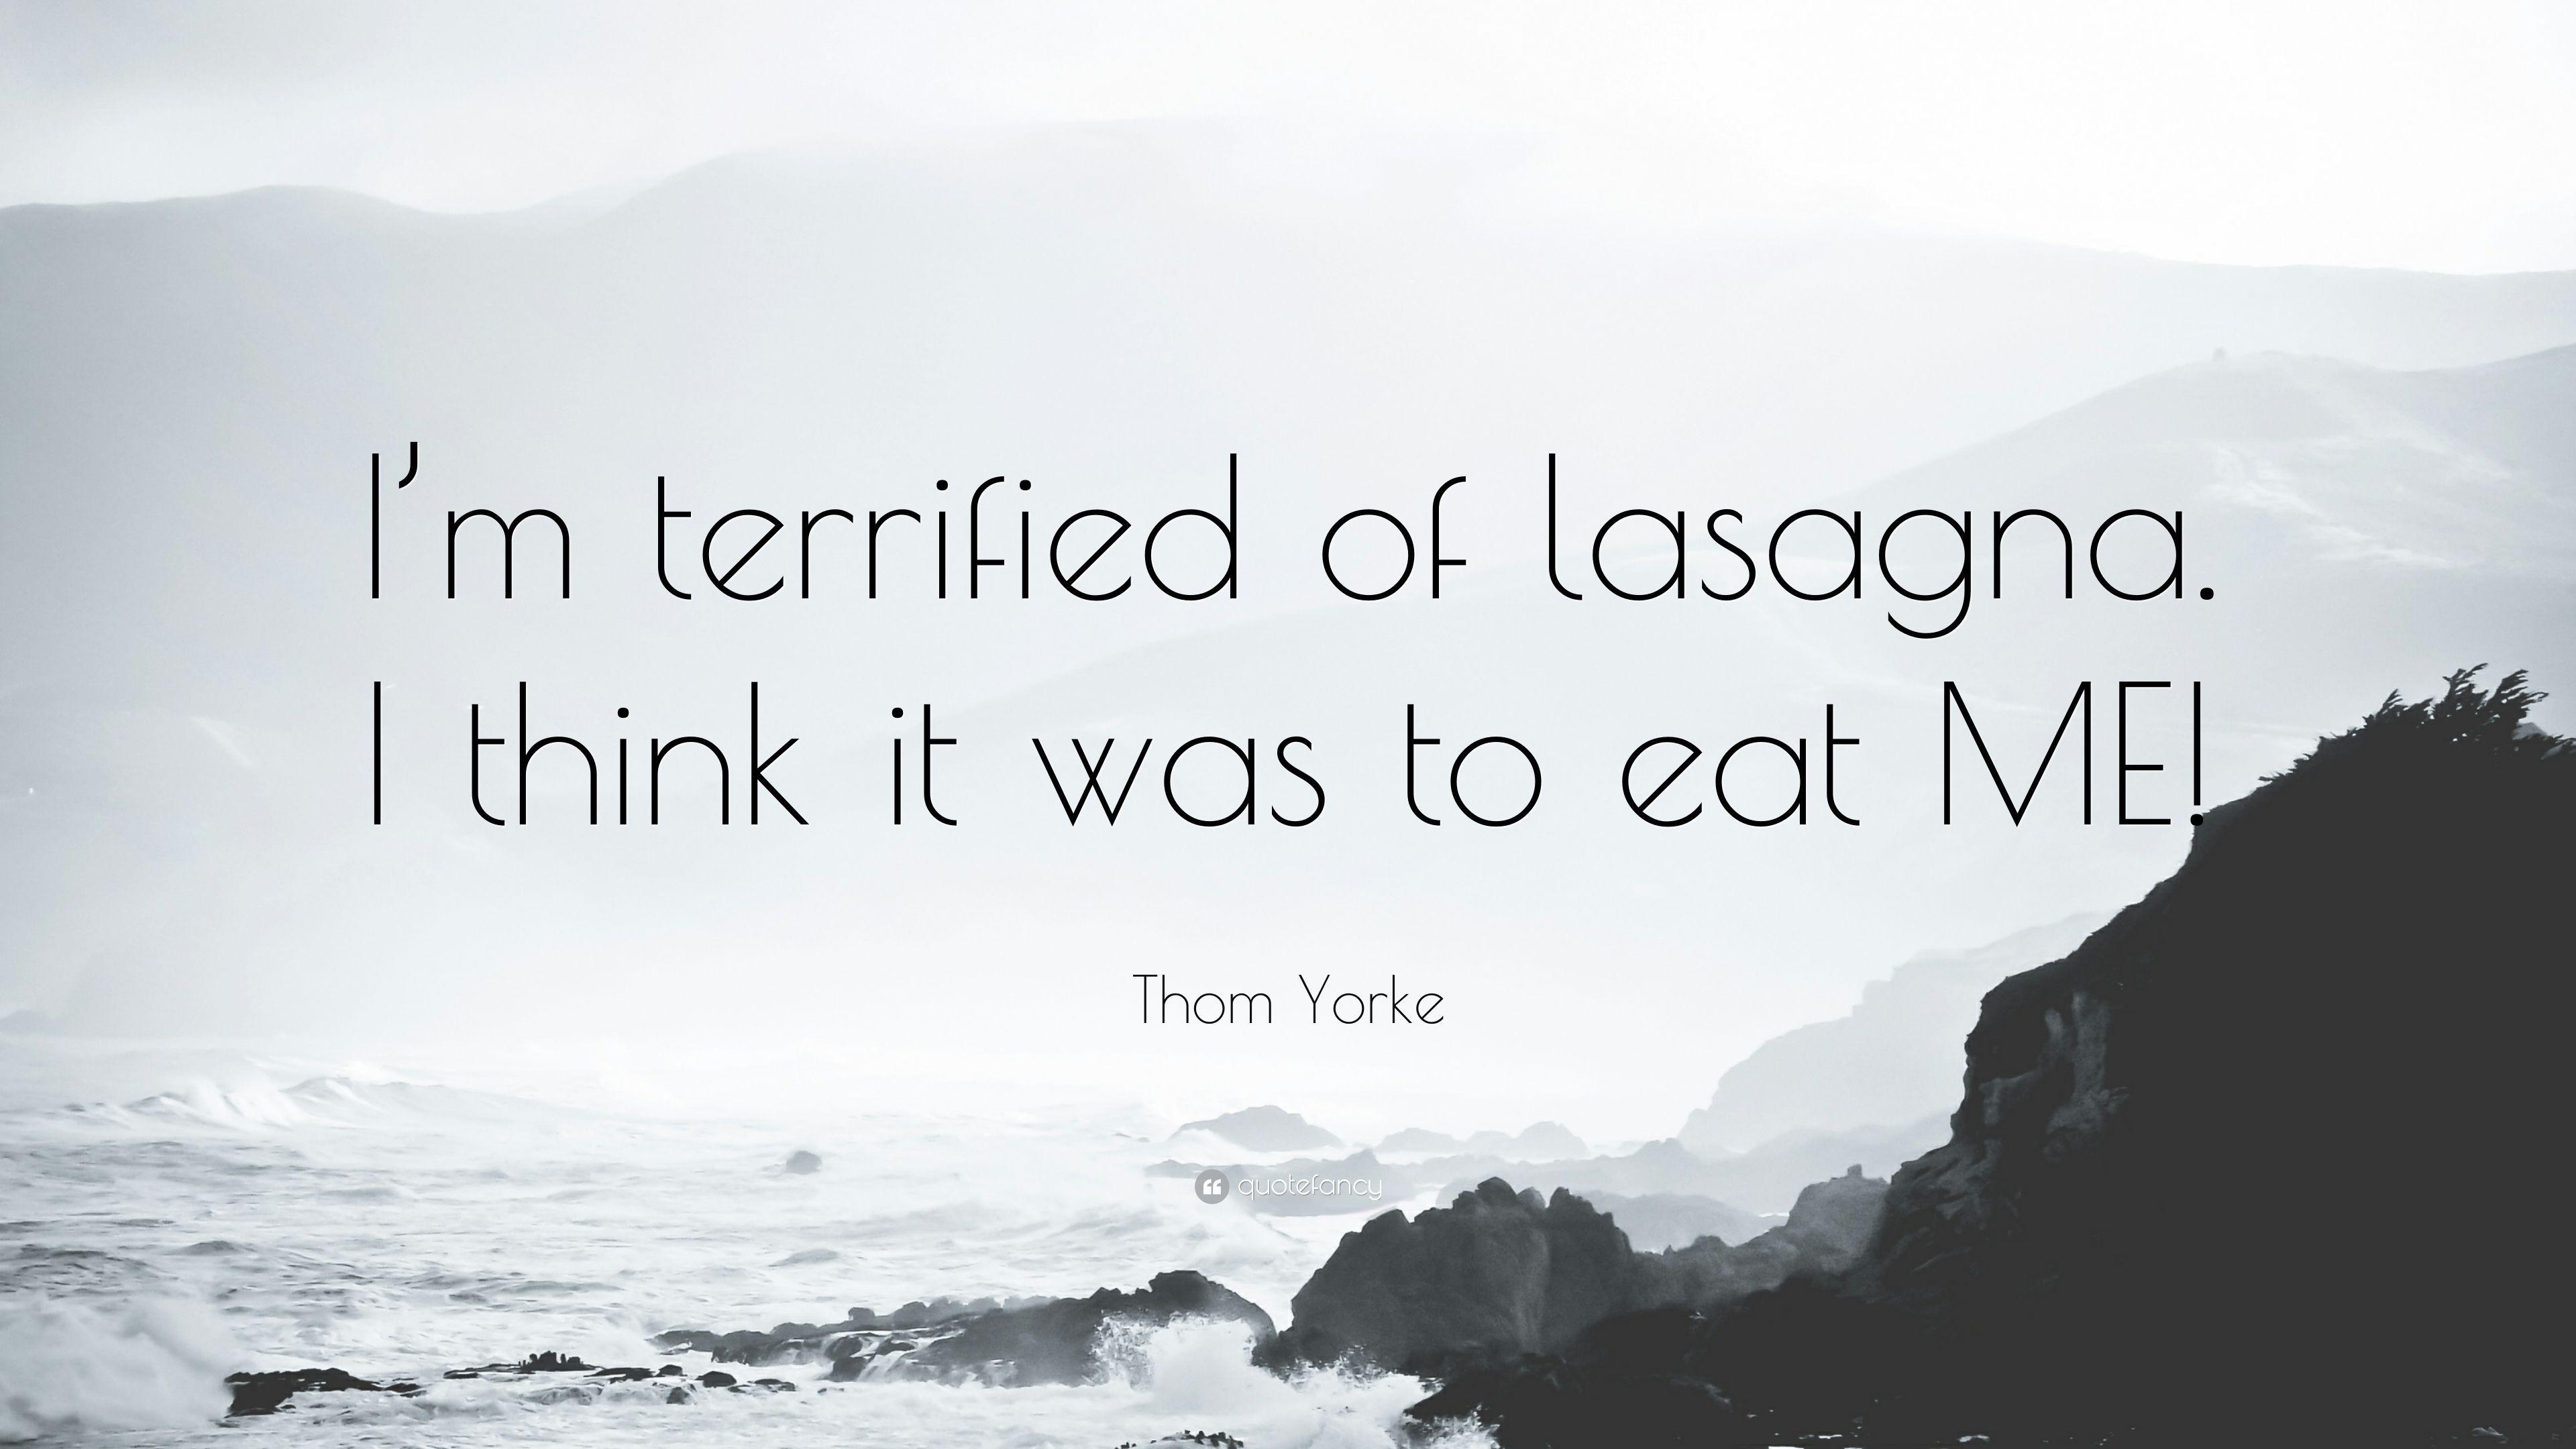 Thom Yorke Quote: “I'm terrified of lasagna. I think it was to eat